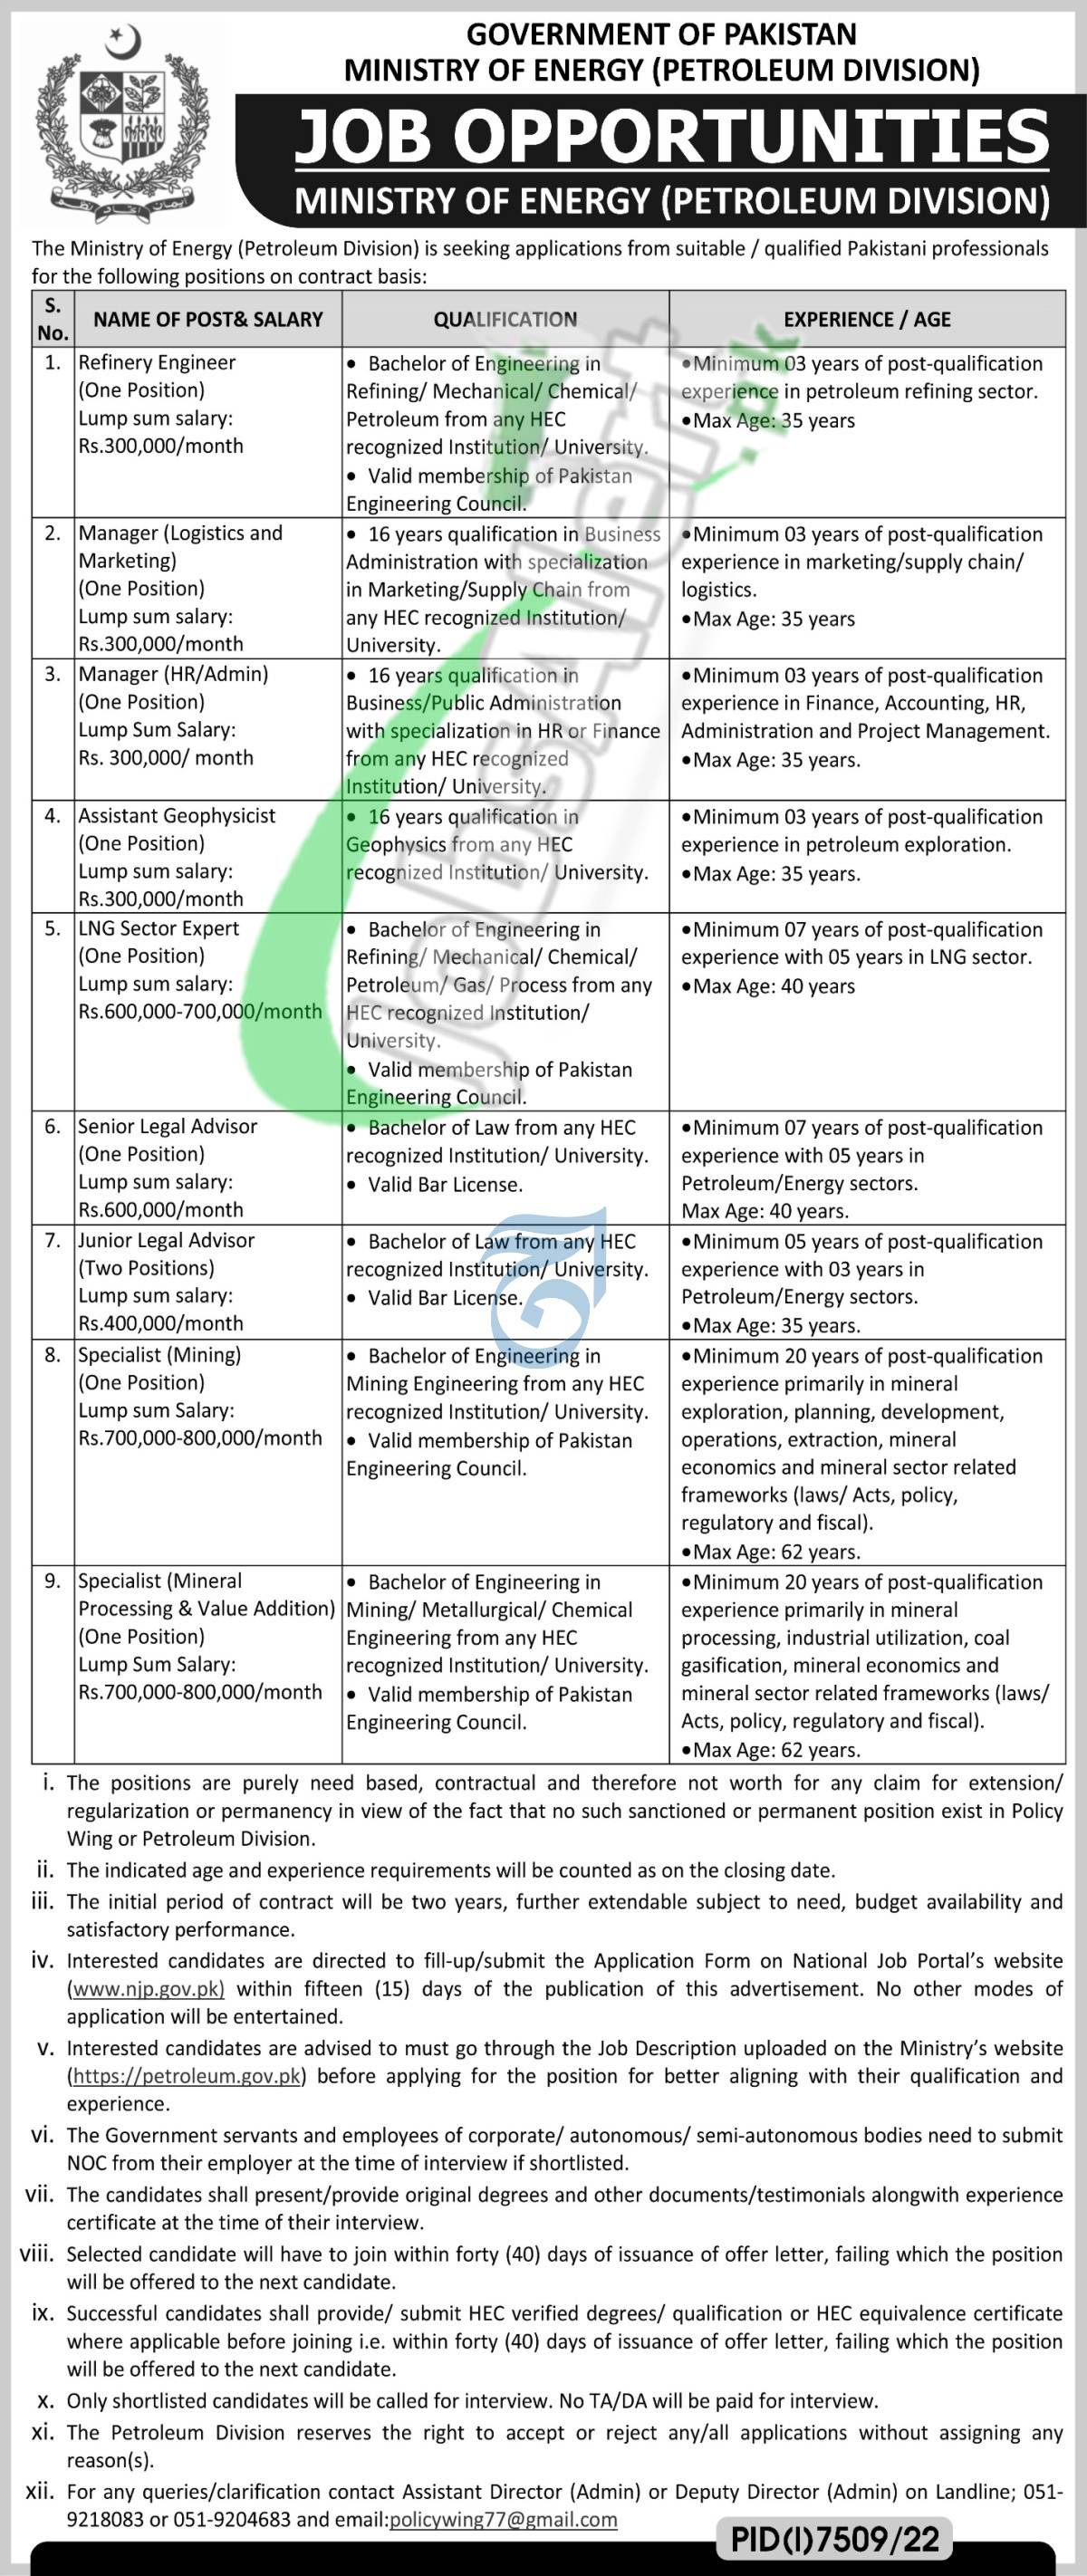 Ministry of Energy Petroleum Division Jobs